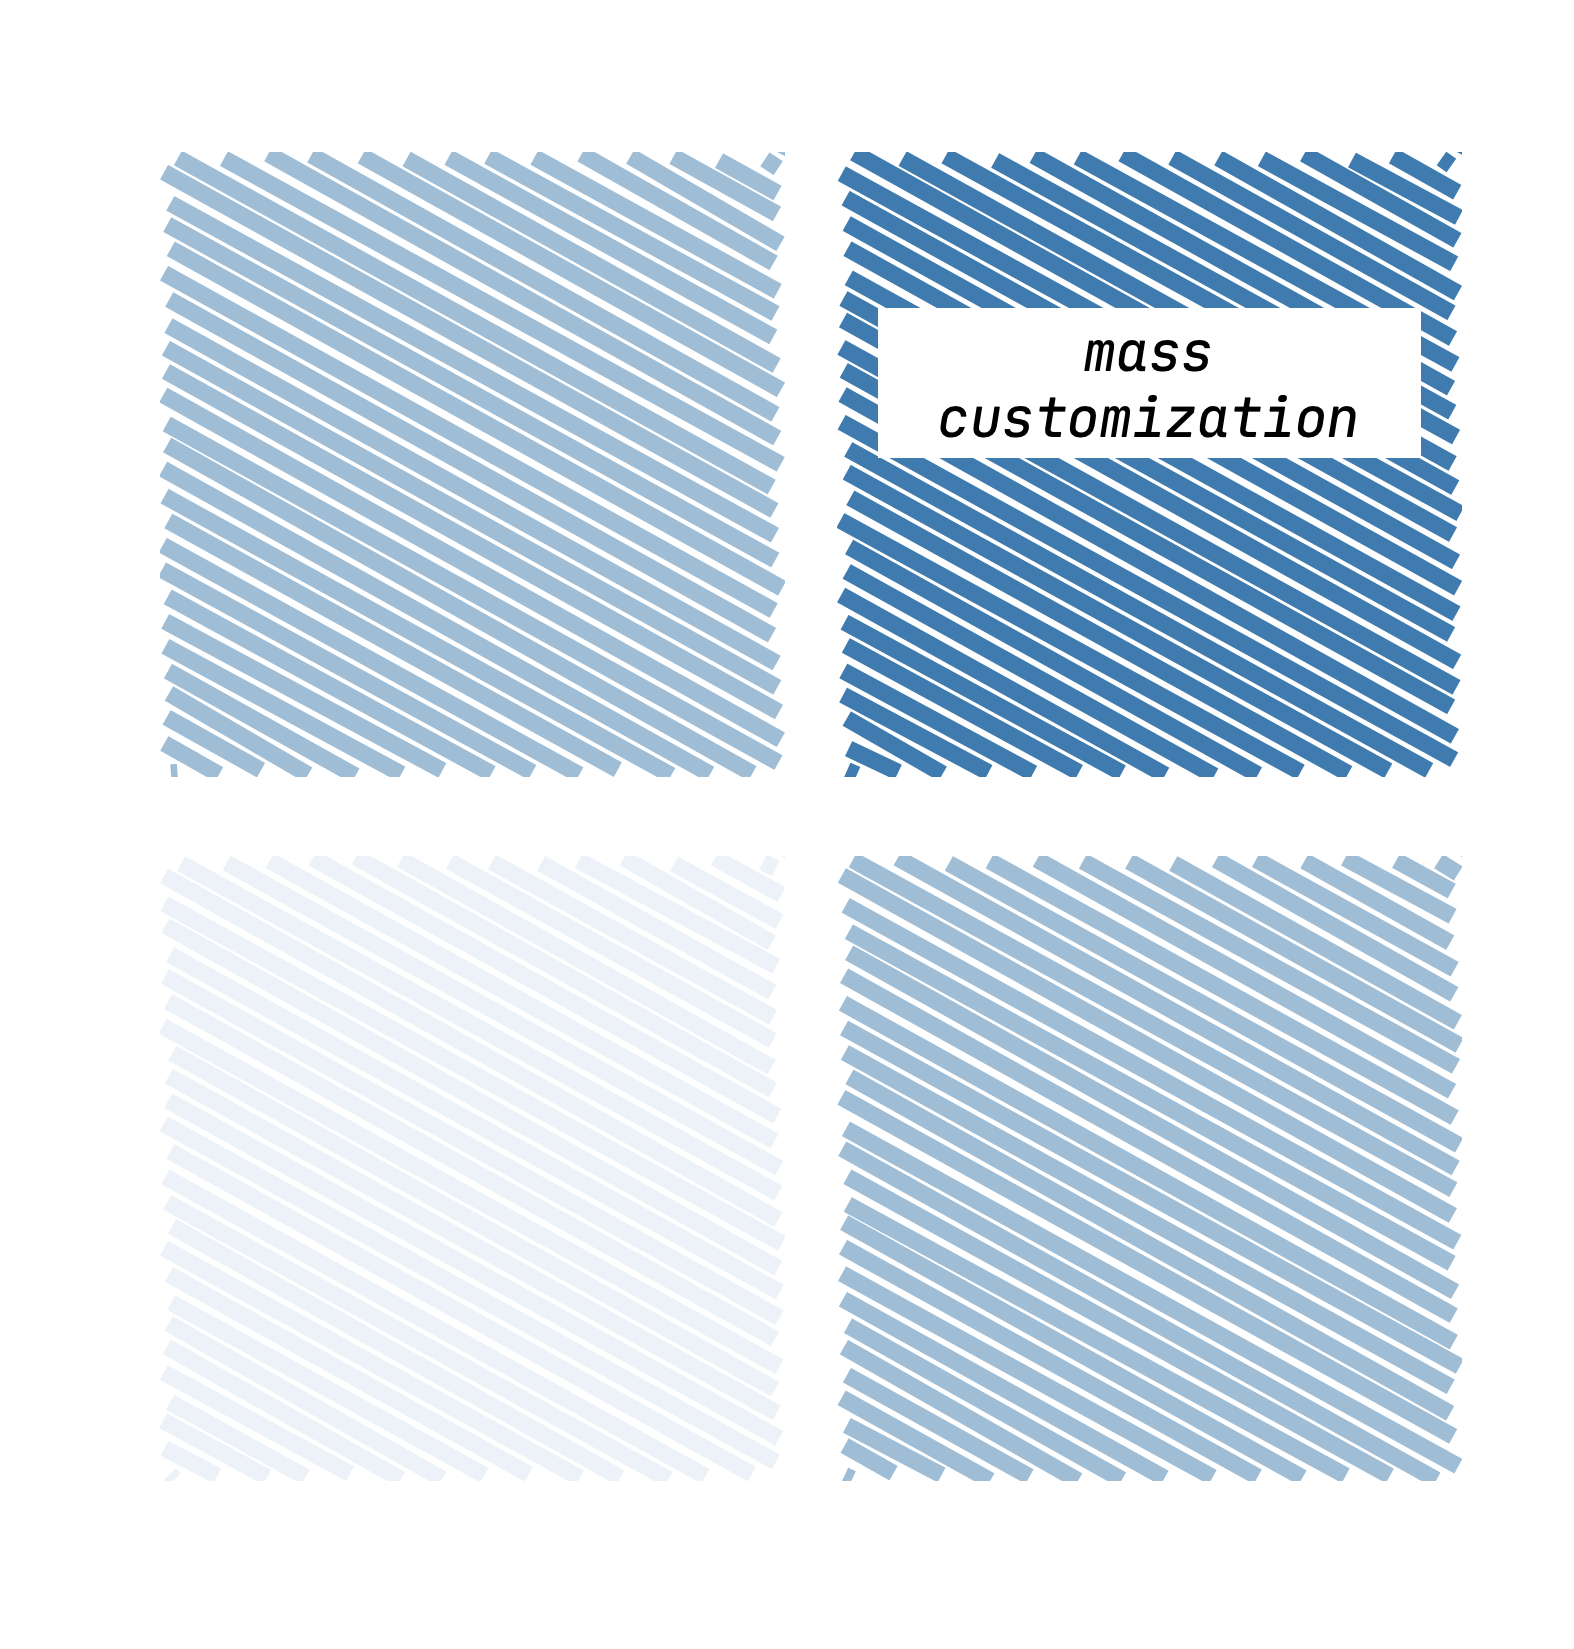 Product variance vs. product volume